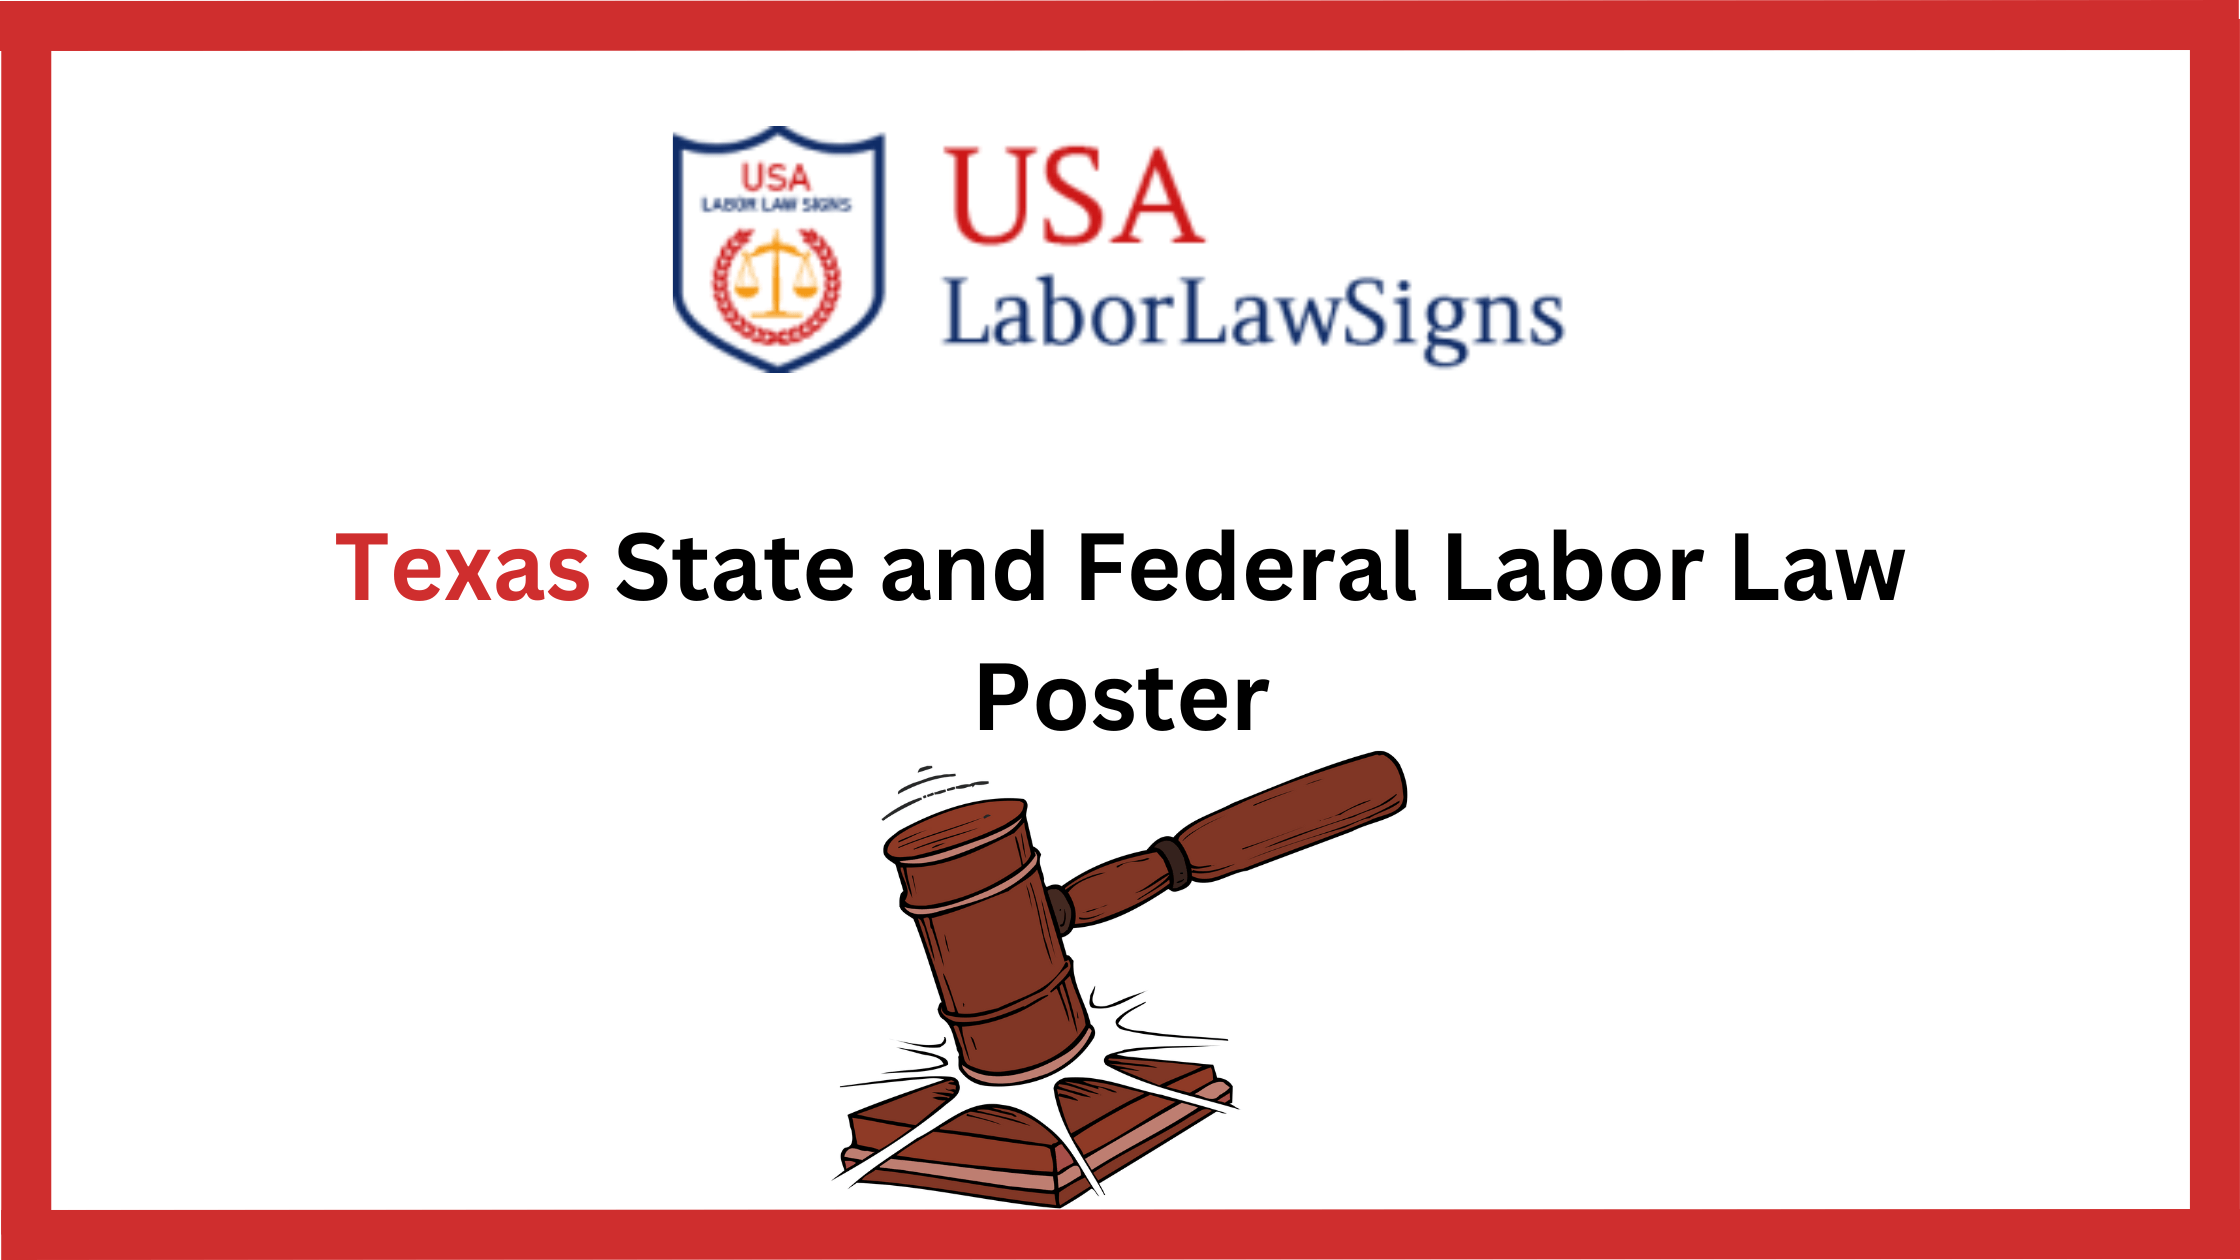 Texas State and Federal Labor Law Poster